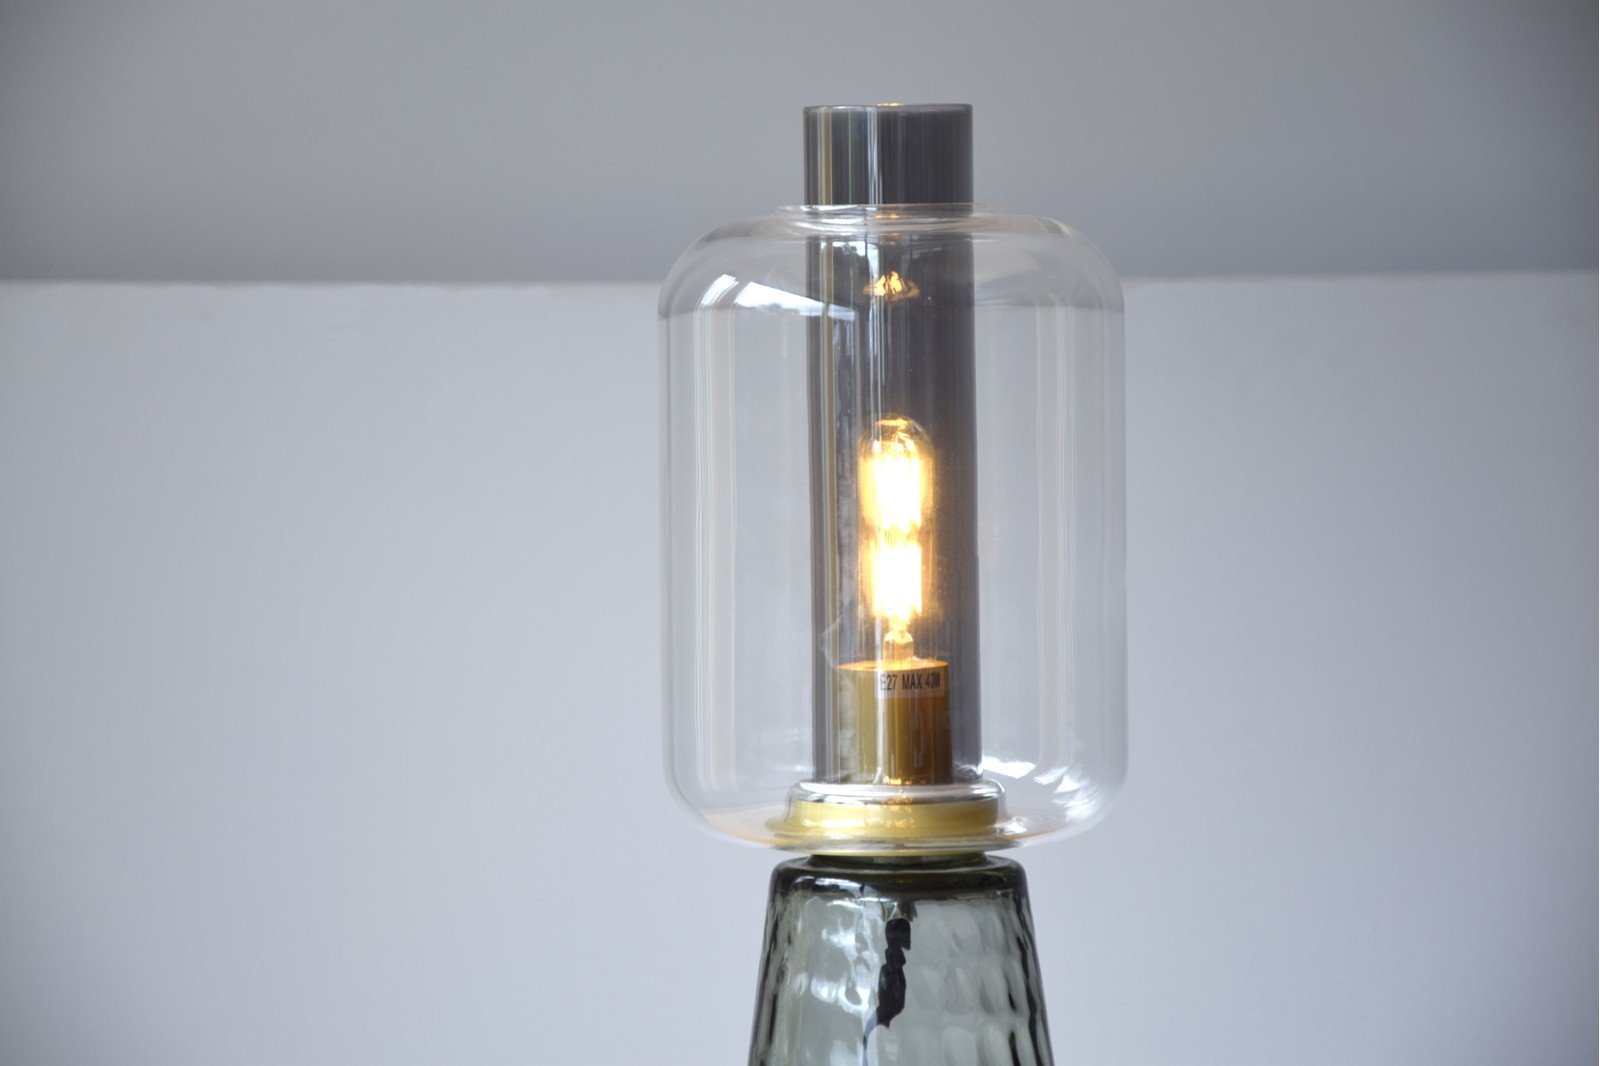 TABLE LAMP COLLECTION CANDIL. SMOKY GLASS. LED